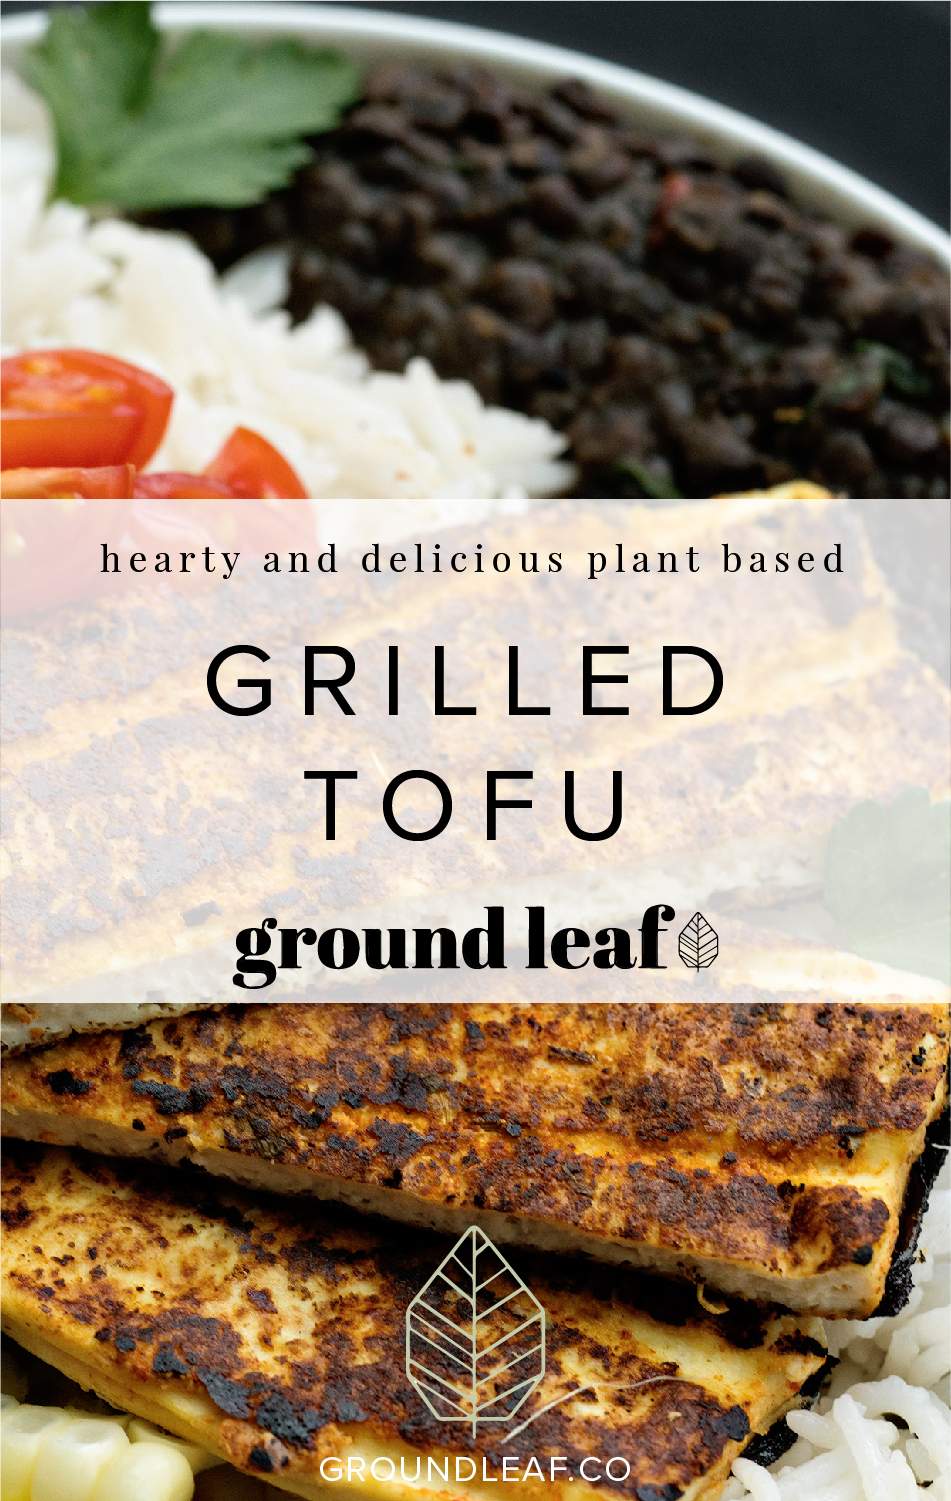 Delicious grilled tofu recipe. | Groundleaf.co